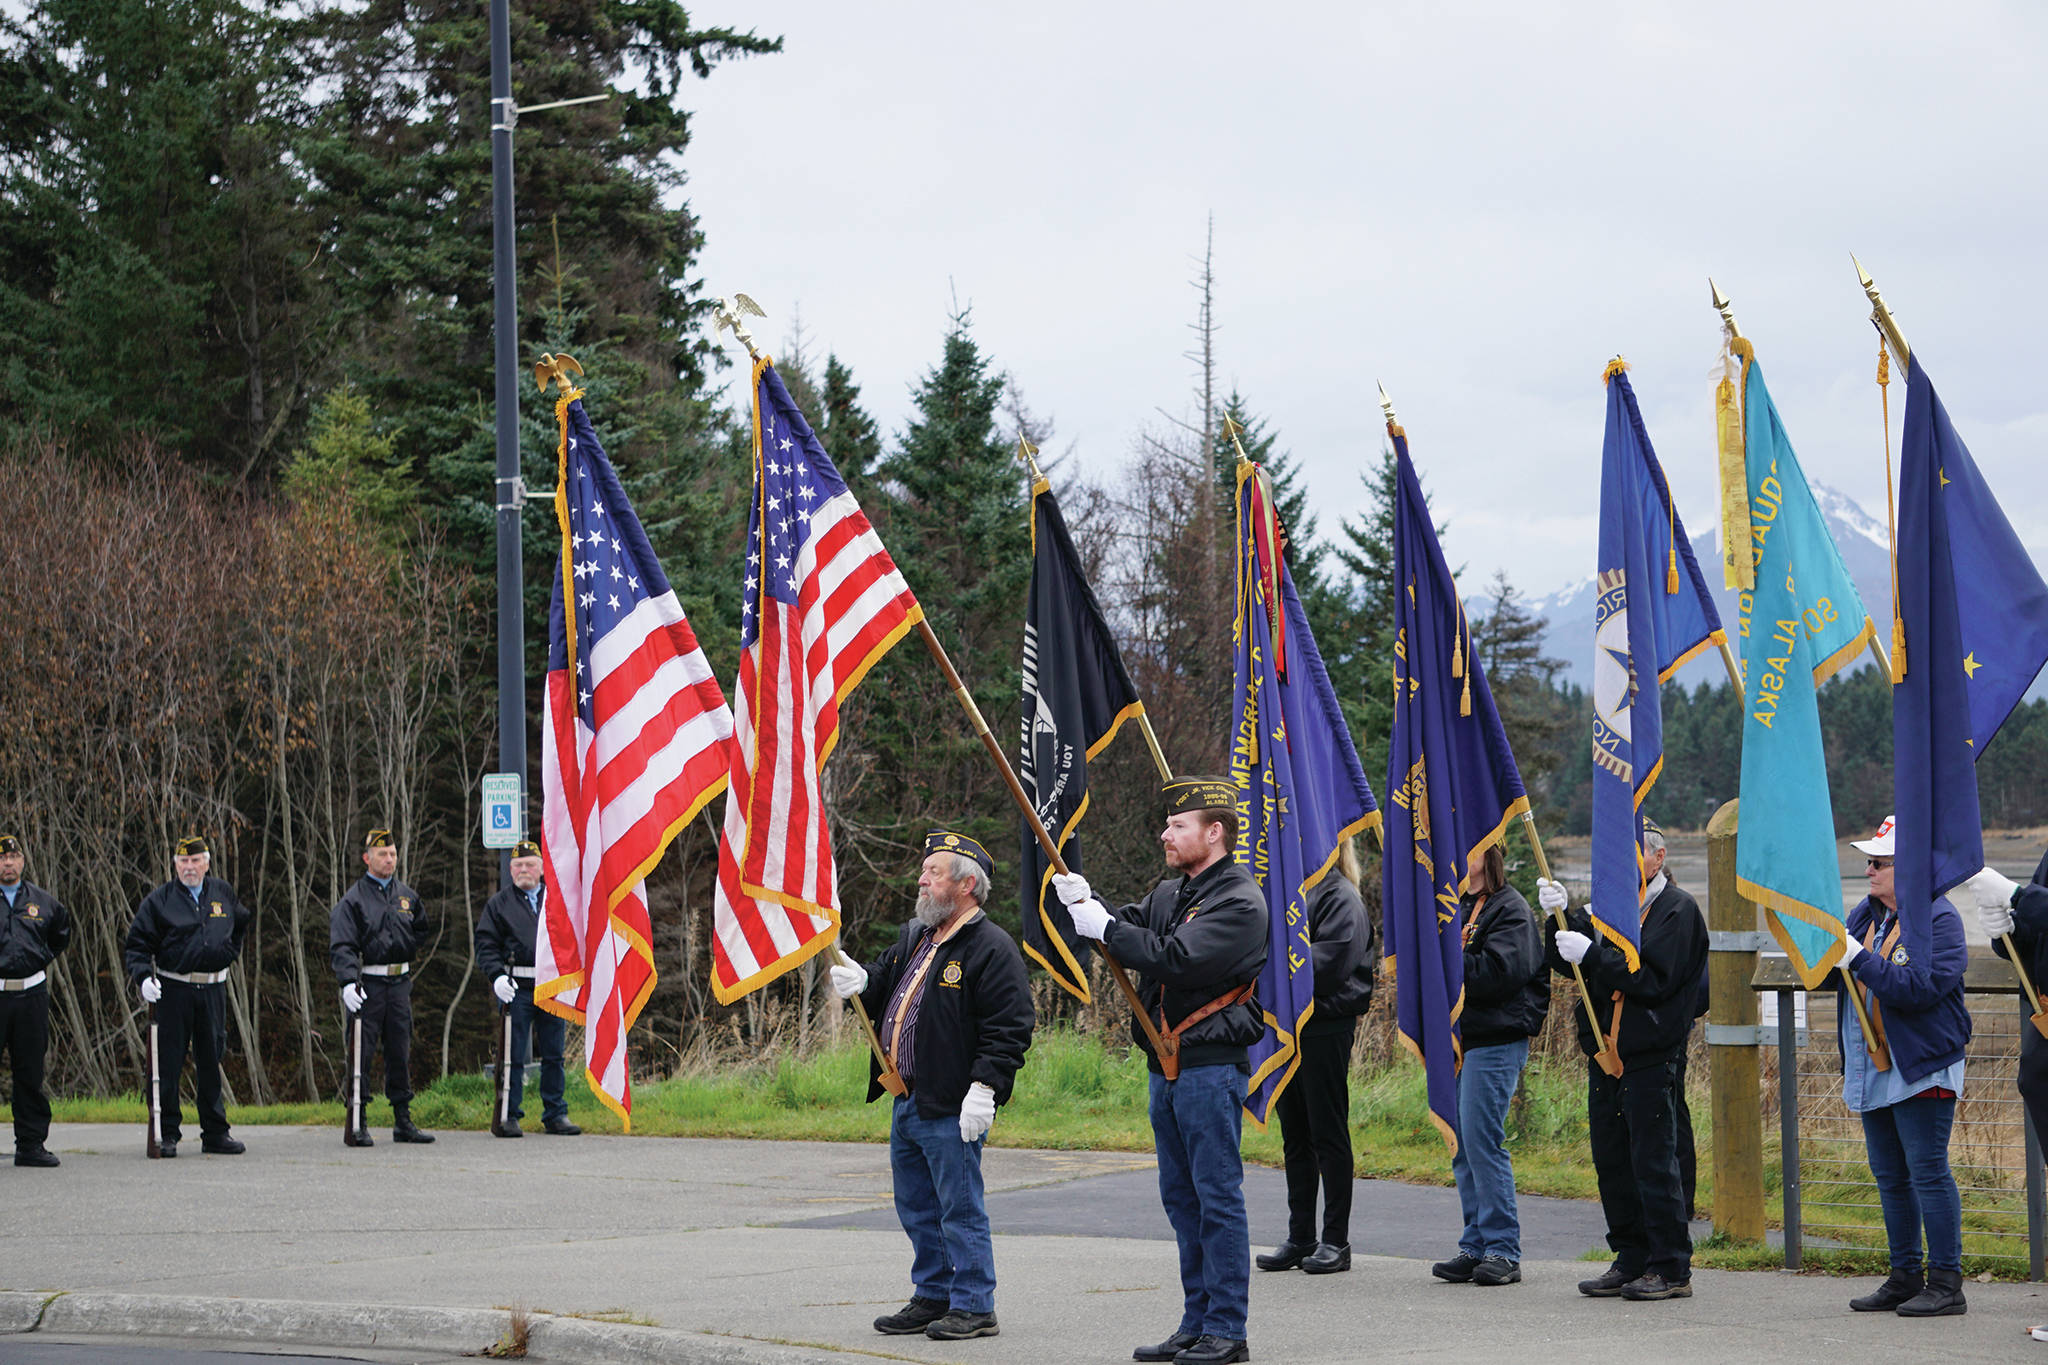 Members of the Veterans of Foreign Wars, Anchor Point Post, the American Legion Post 16 and the Sons of the American Legion Post 16 participate in Veterans Day ceremonies on Nov. 11, 2019, at the Alaska Islands and Ocean Visitor Center. (Photo by Michael Armstrong / Homer News)